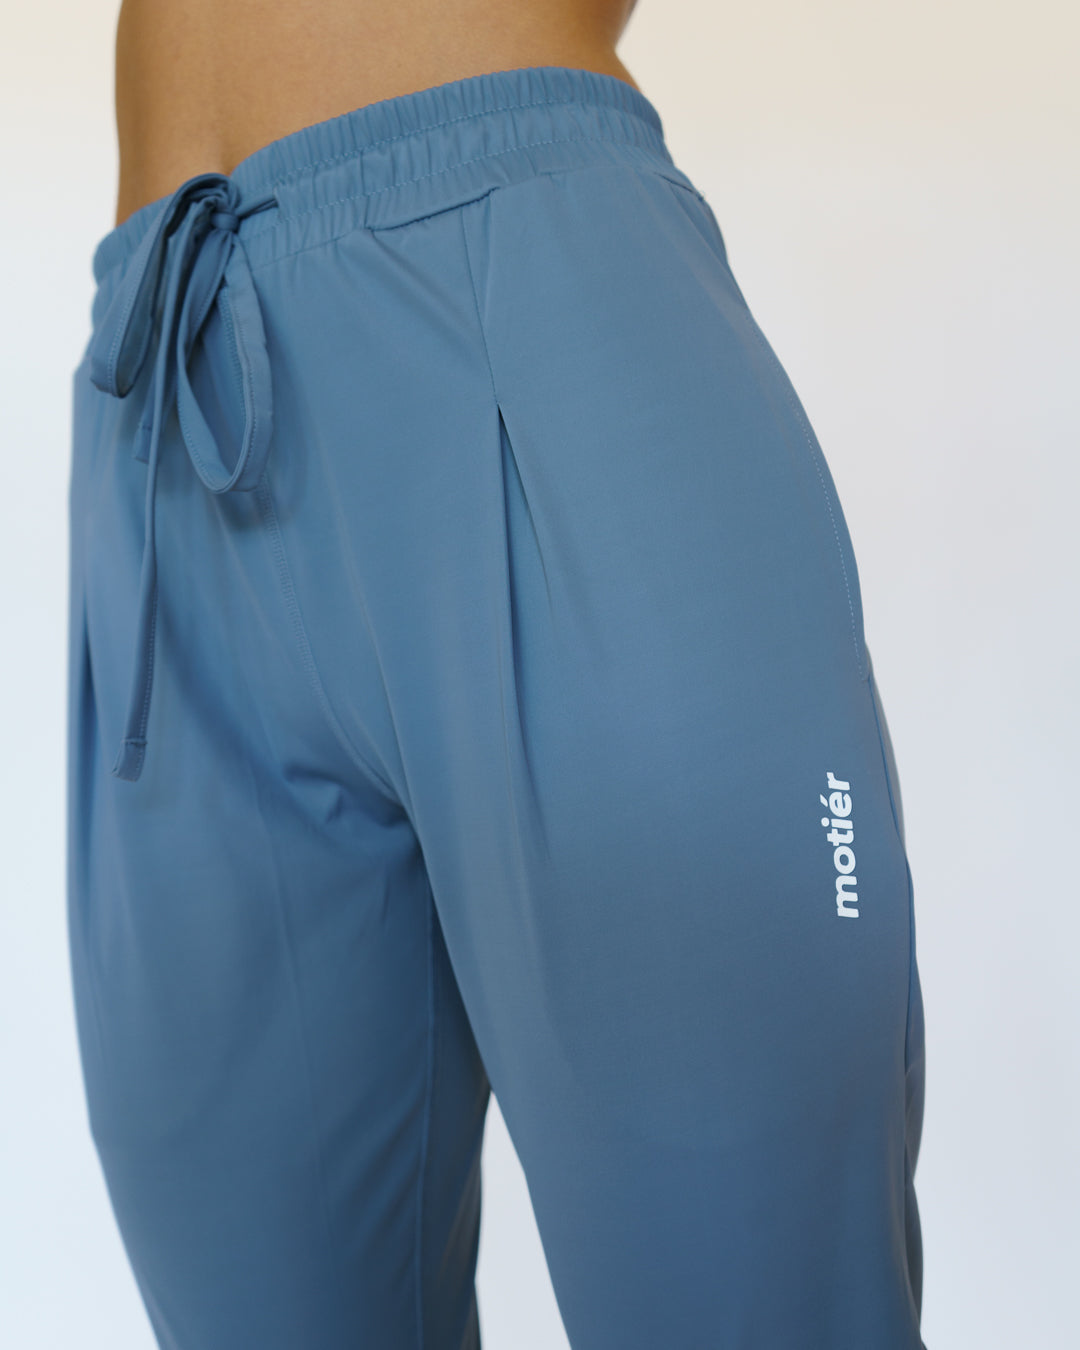 Daily Active Joggers (Teal Grey)